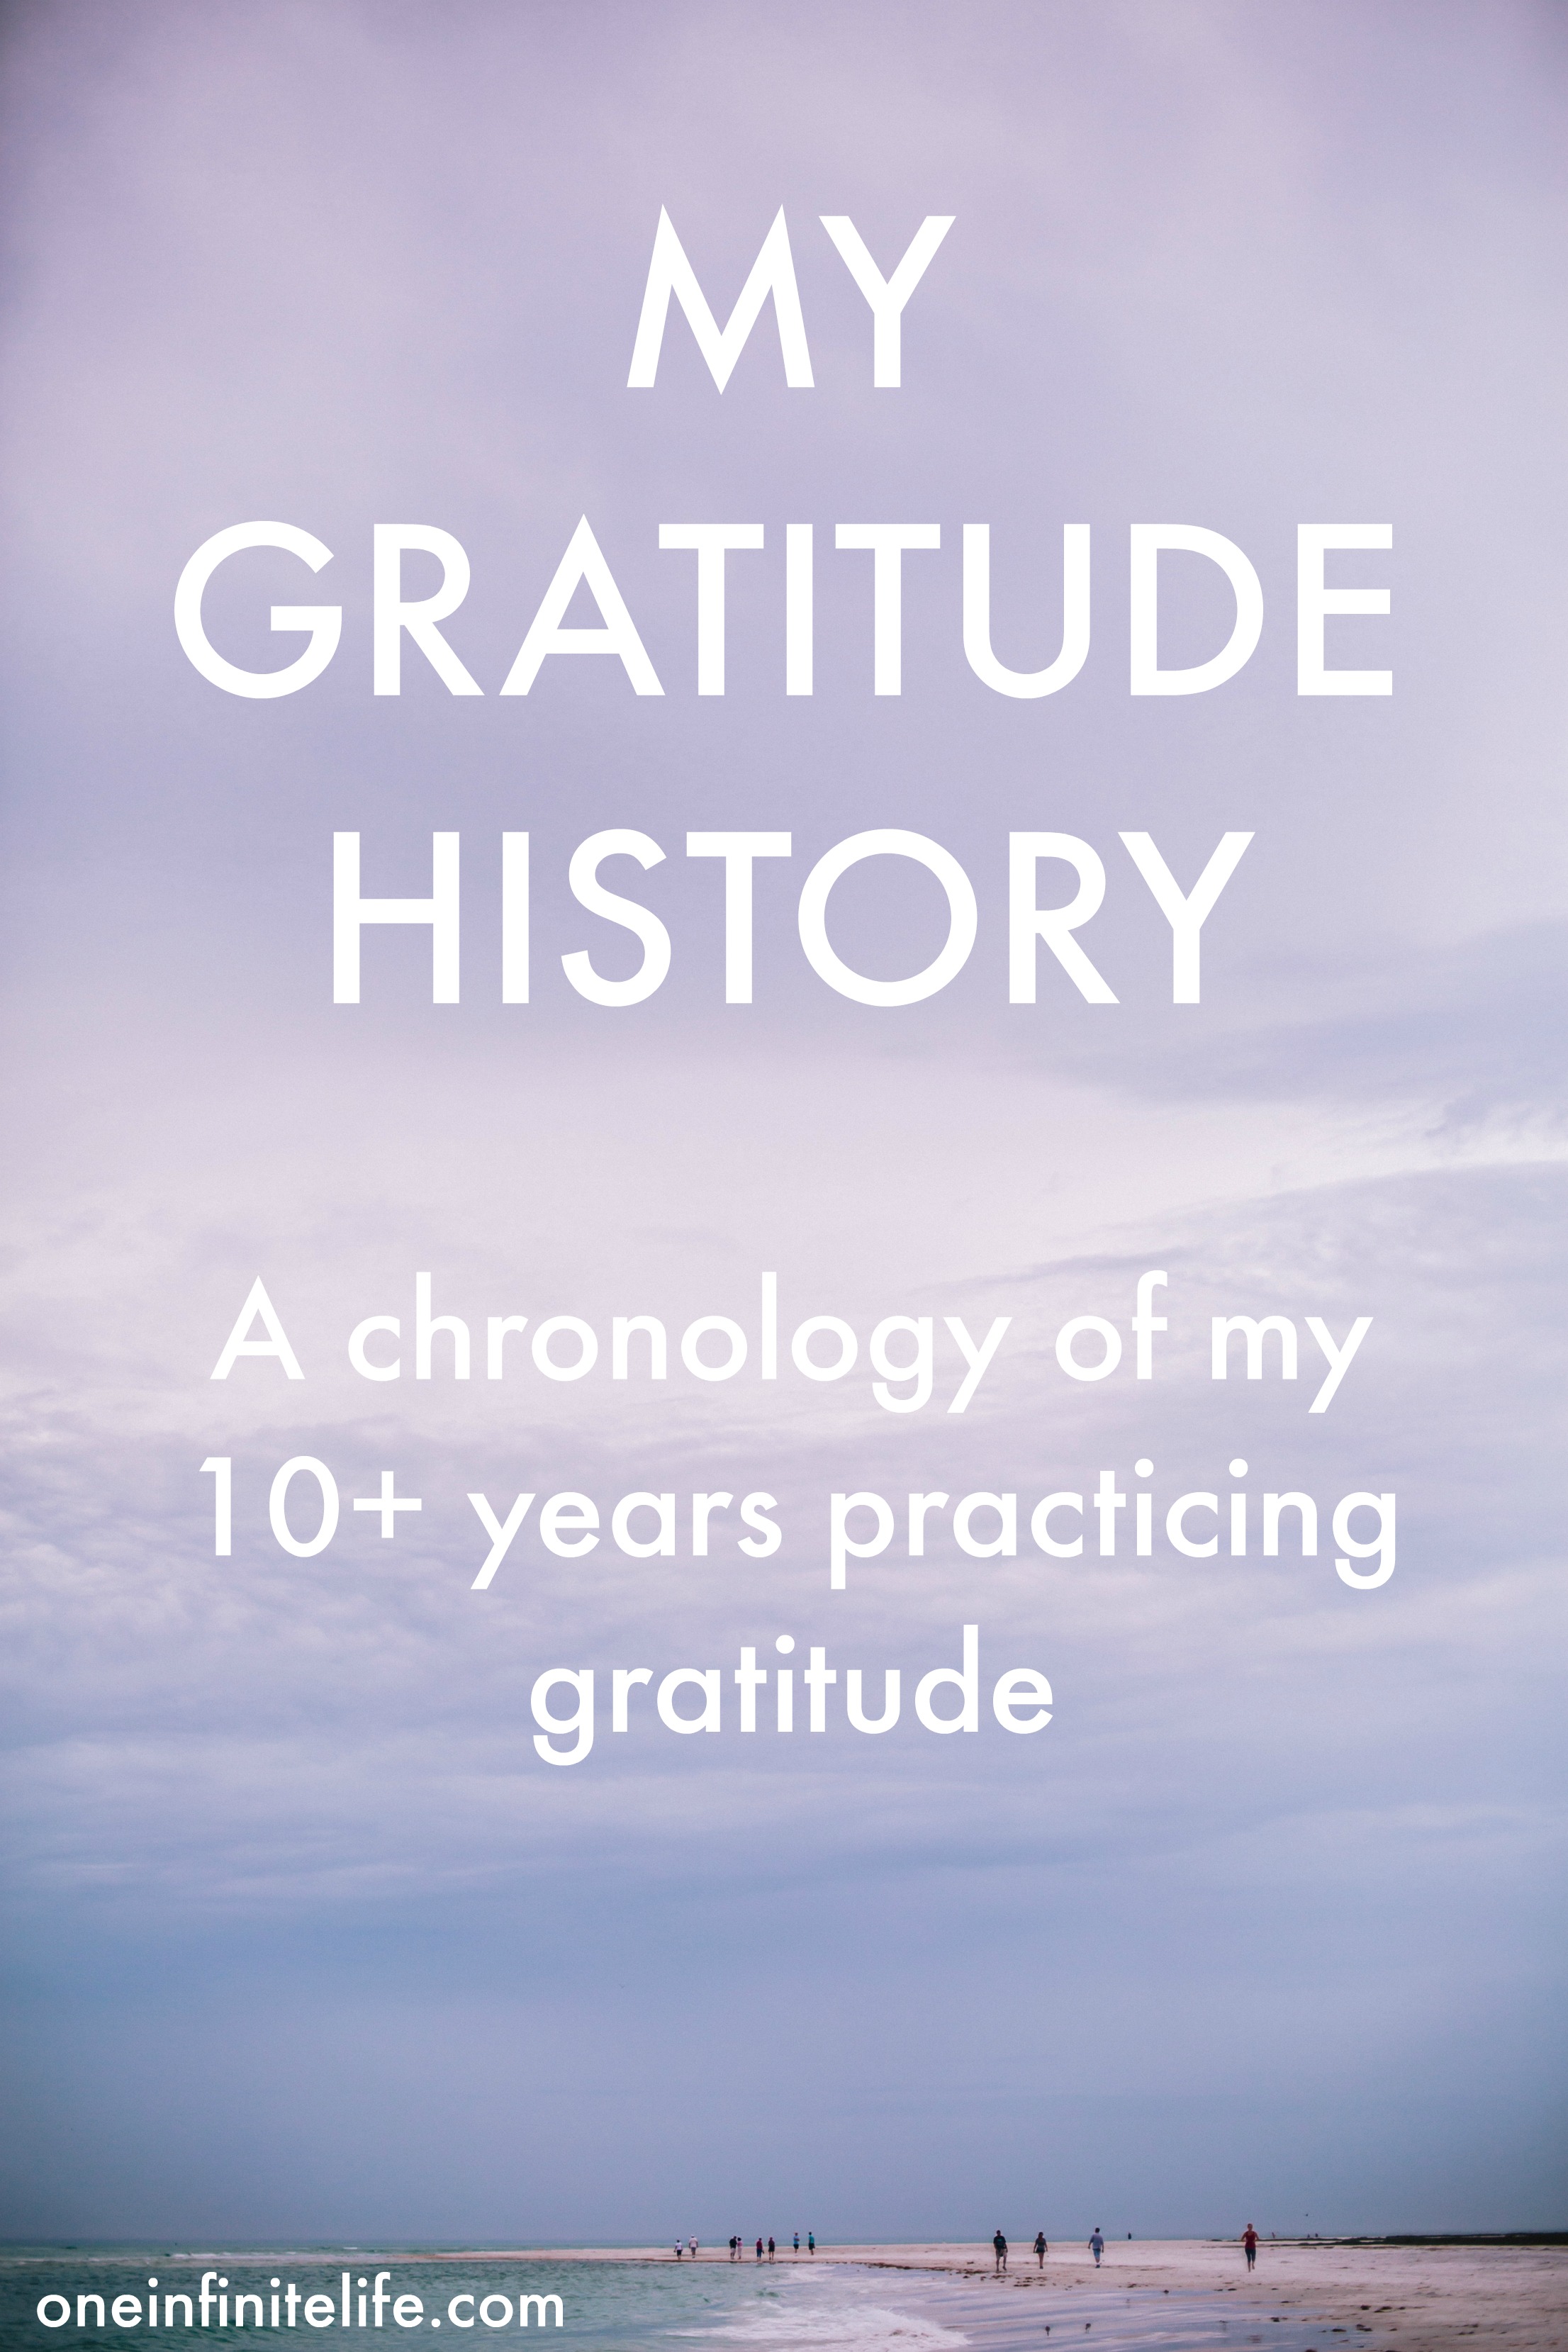 I've been practicing gratitude — with varying levels of devotion — for over a decade now, since I was thirteen years old. It's now been more than 11 years since I was first introduced to this practice. And during that time I've experience how incredibly powerful this practice can be. Here's a lowdown on my gratitude history and a chronology of how gratitude has played a role in my life over the past decade https://oneinfinitelife.com/my-gratitude-history/